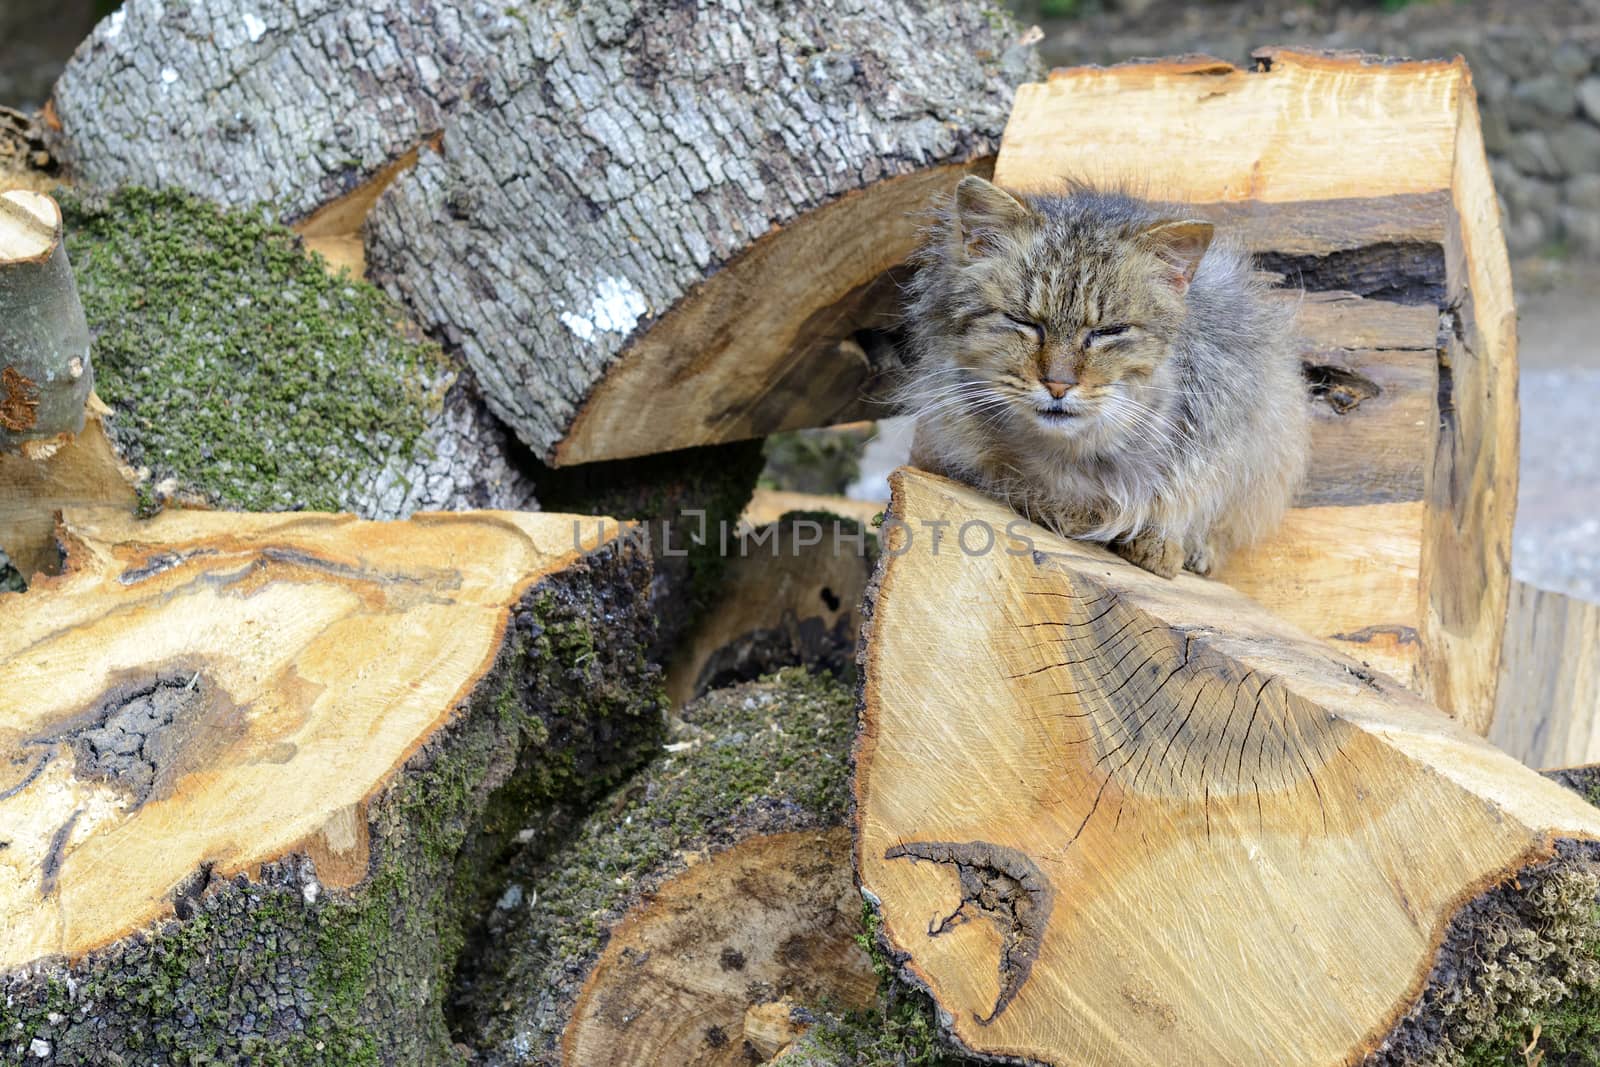 The old cat rests in the sun on top of wood piles